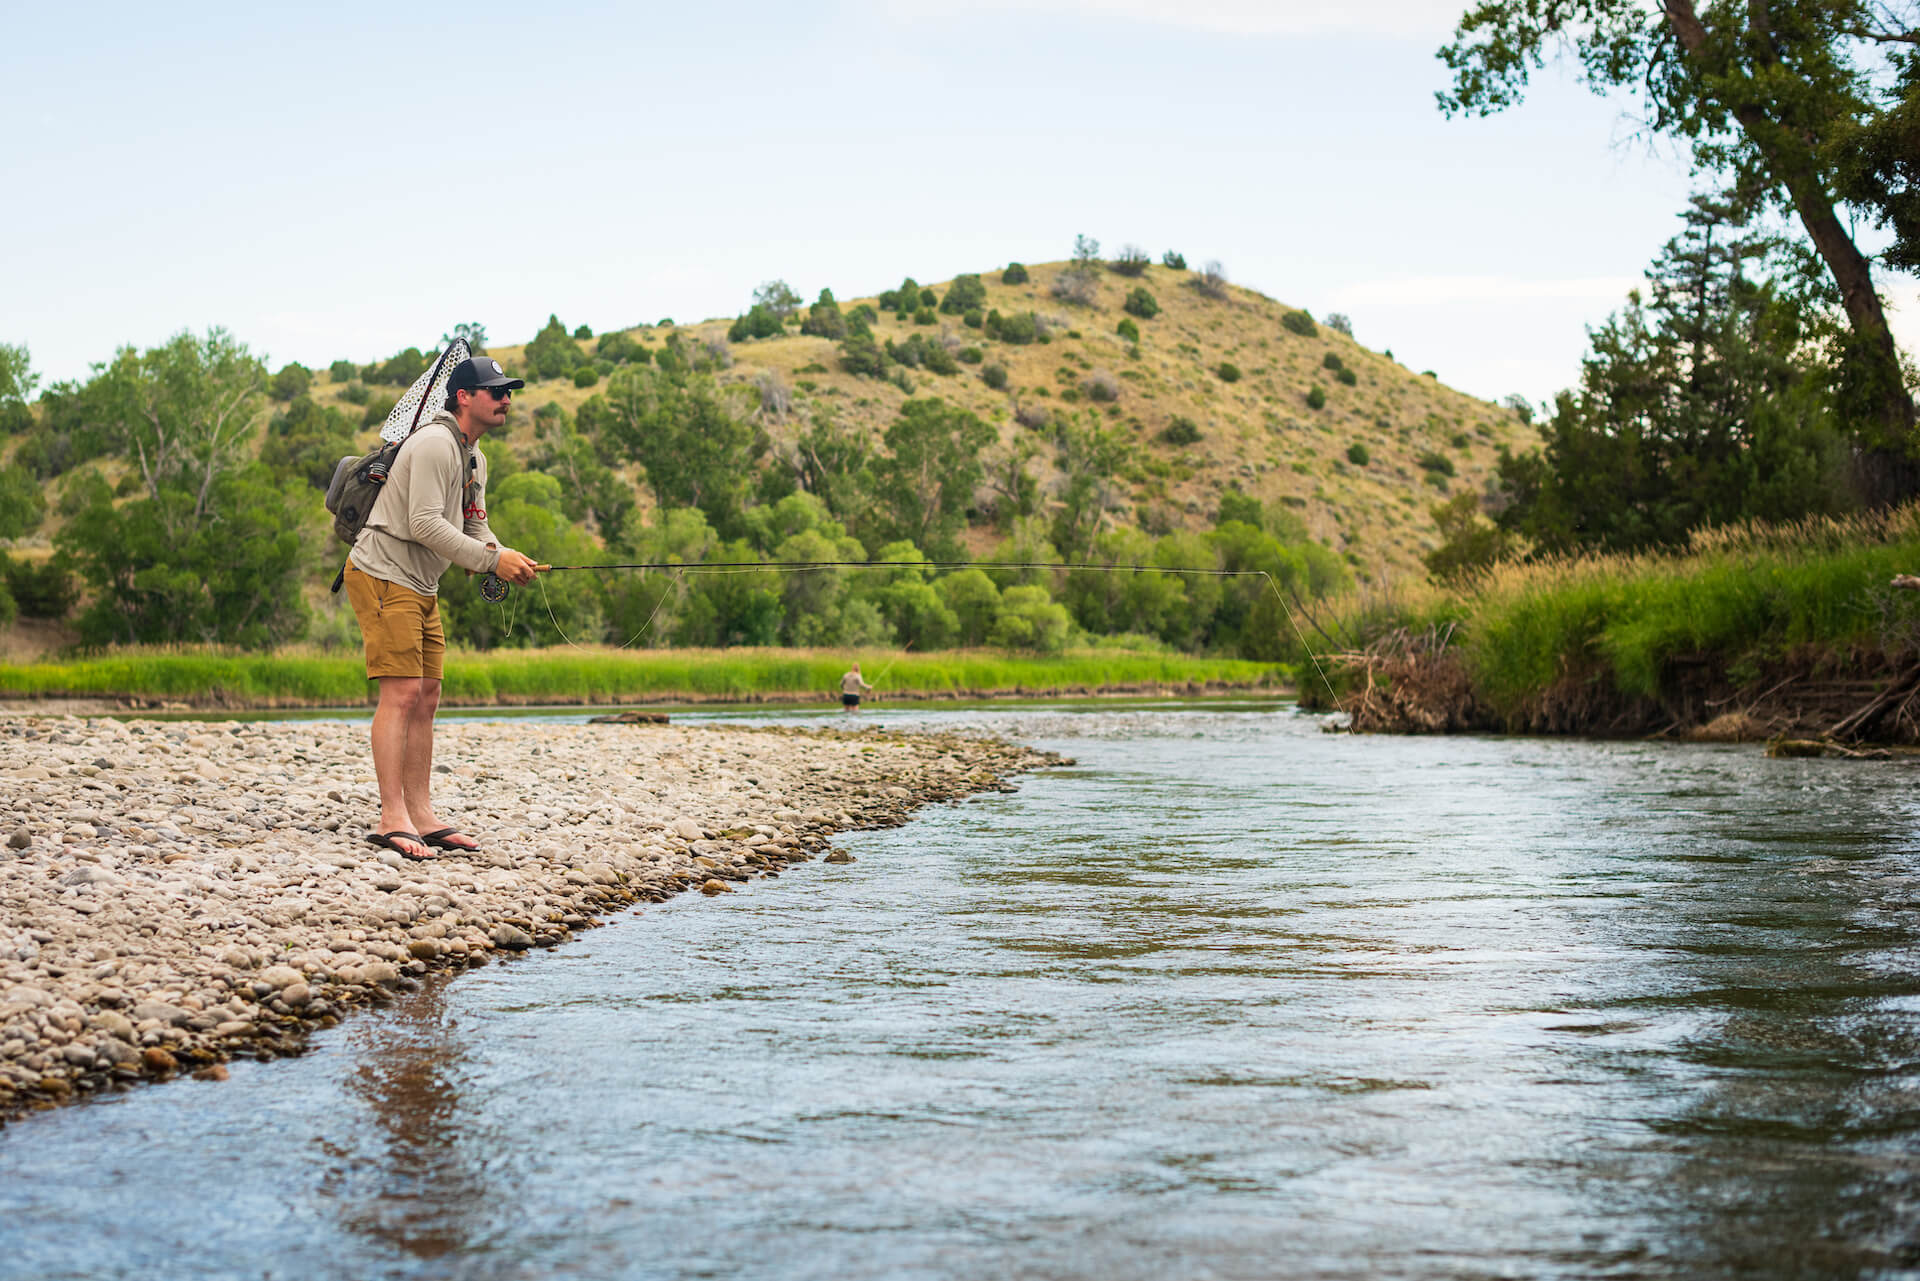 Fly fisherman wet wading in Montana.